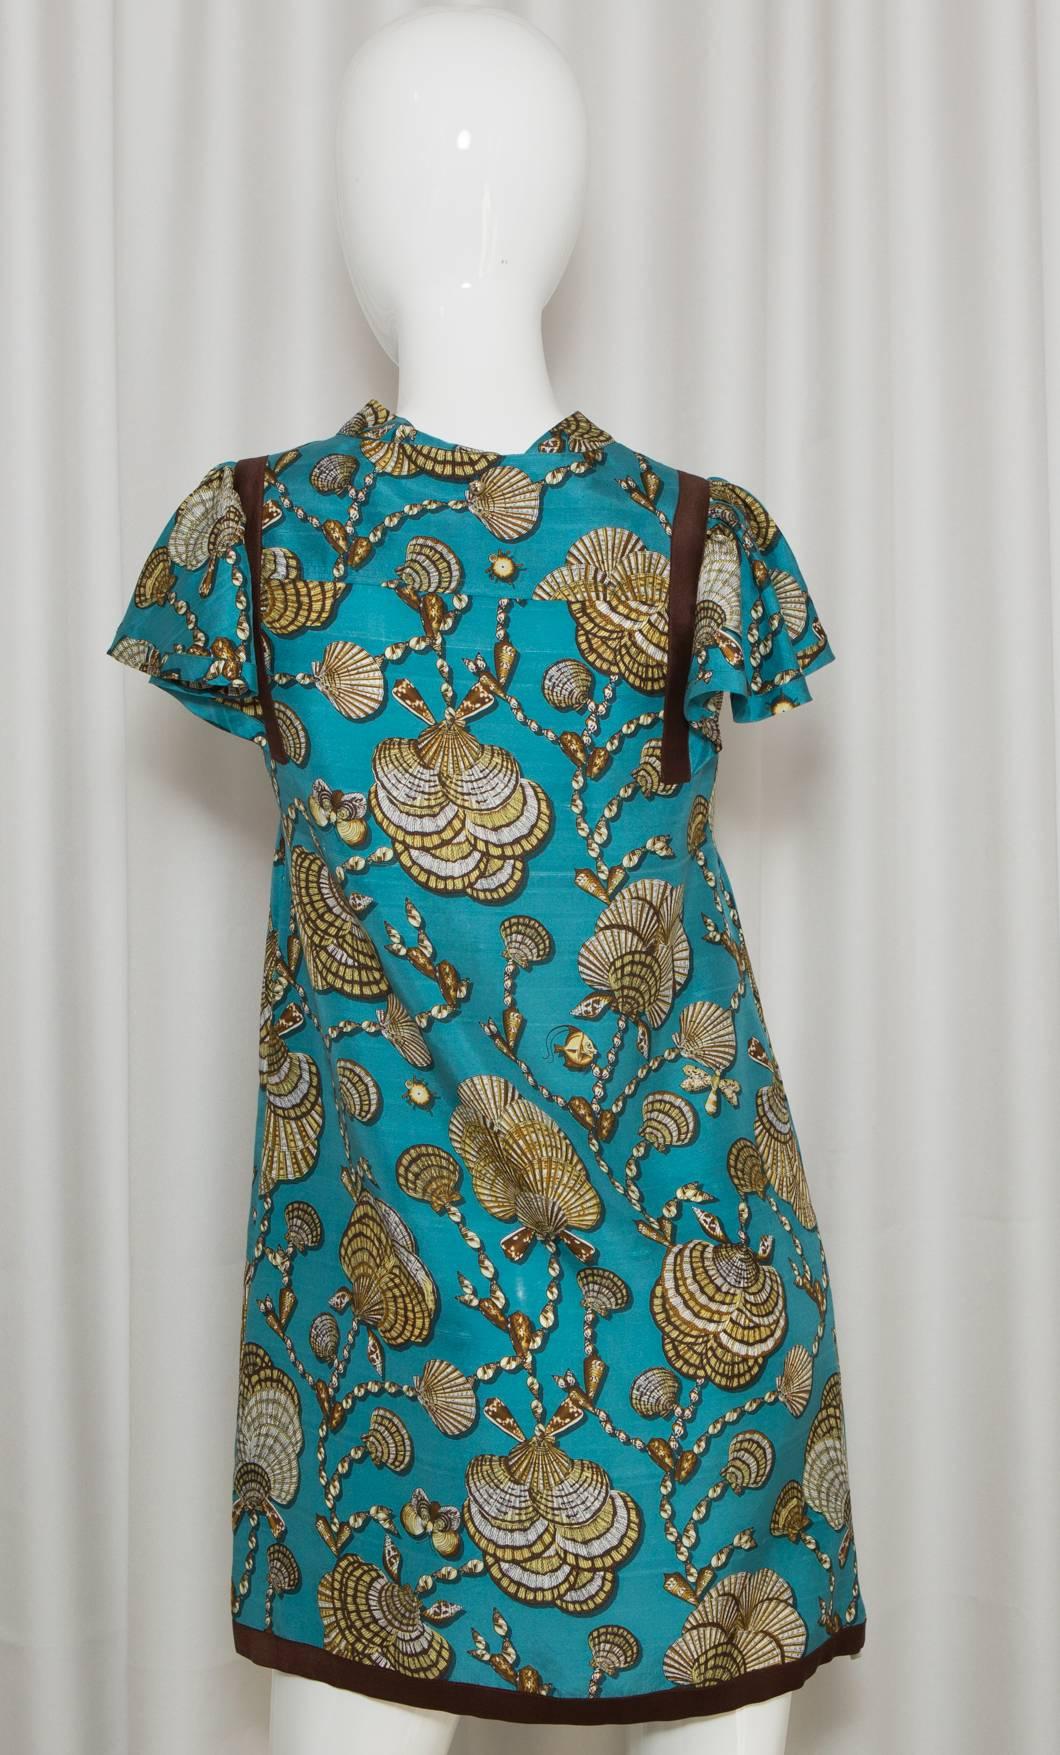 Short Sleeve turquoise tunic silk dress with tan shell pattern and neck tie closure.